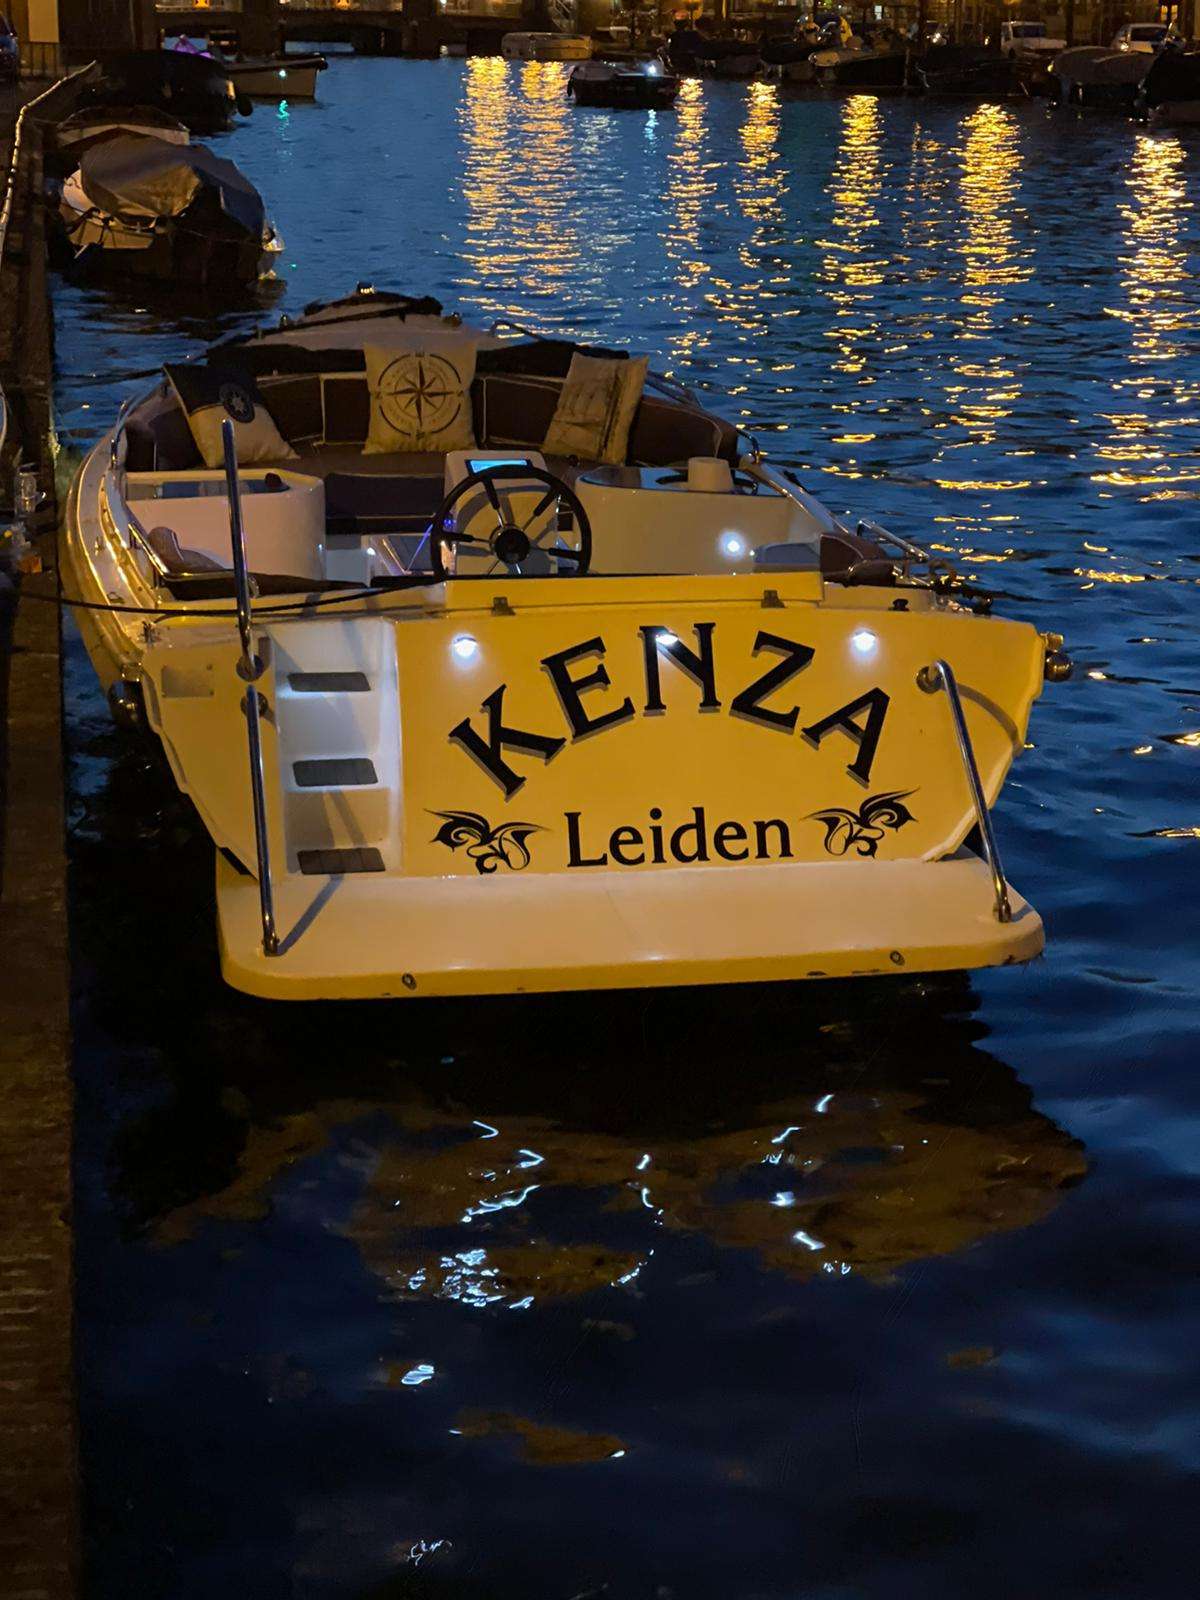 KENZA 710 offers the finest tender come and enjoy the Leiden beauty